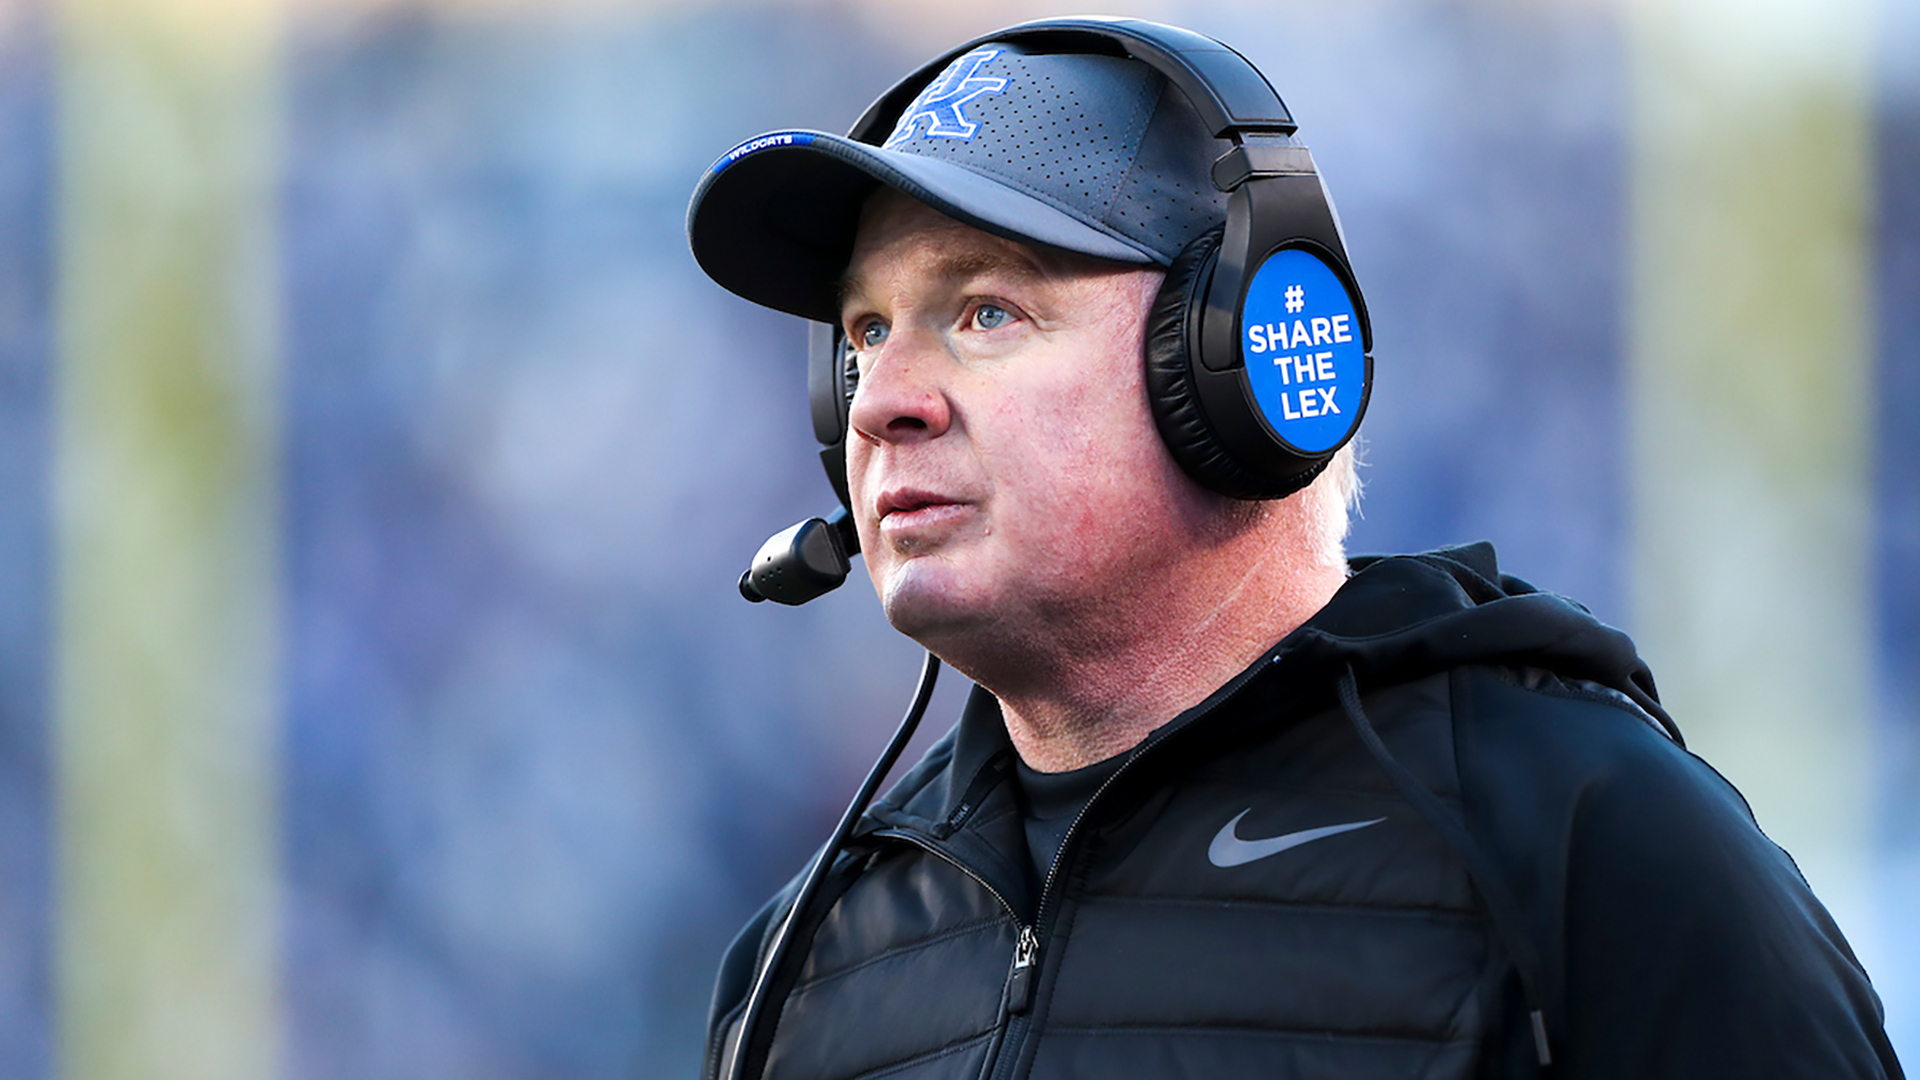 UK HealthCare Music City Bowl Preview with Mark Stoops, Brad White and Vince Marrow